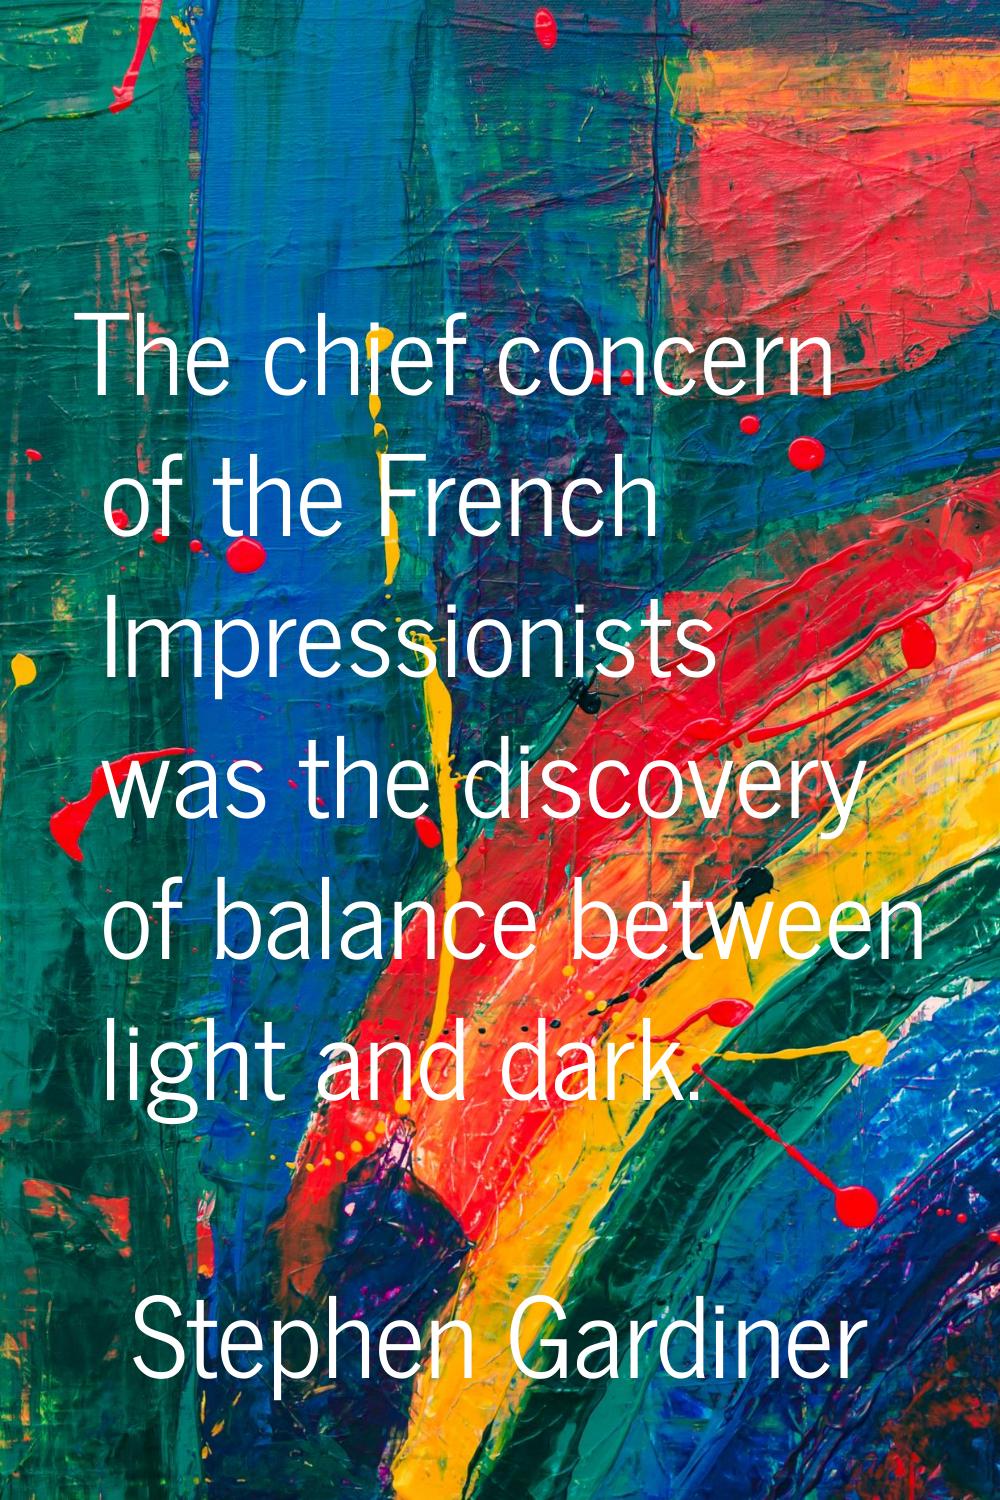 The chief concern of the French Impressionists was the discovery of balance between light and dark.